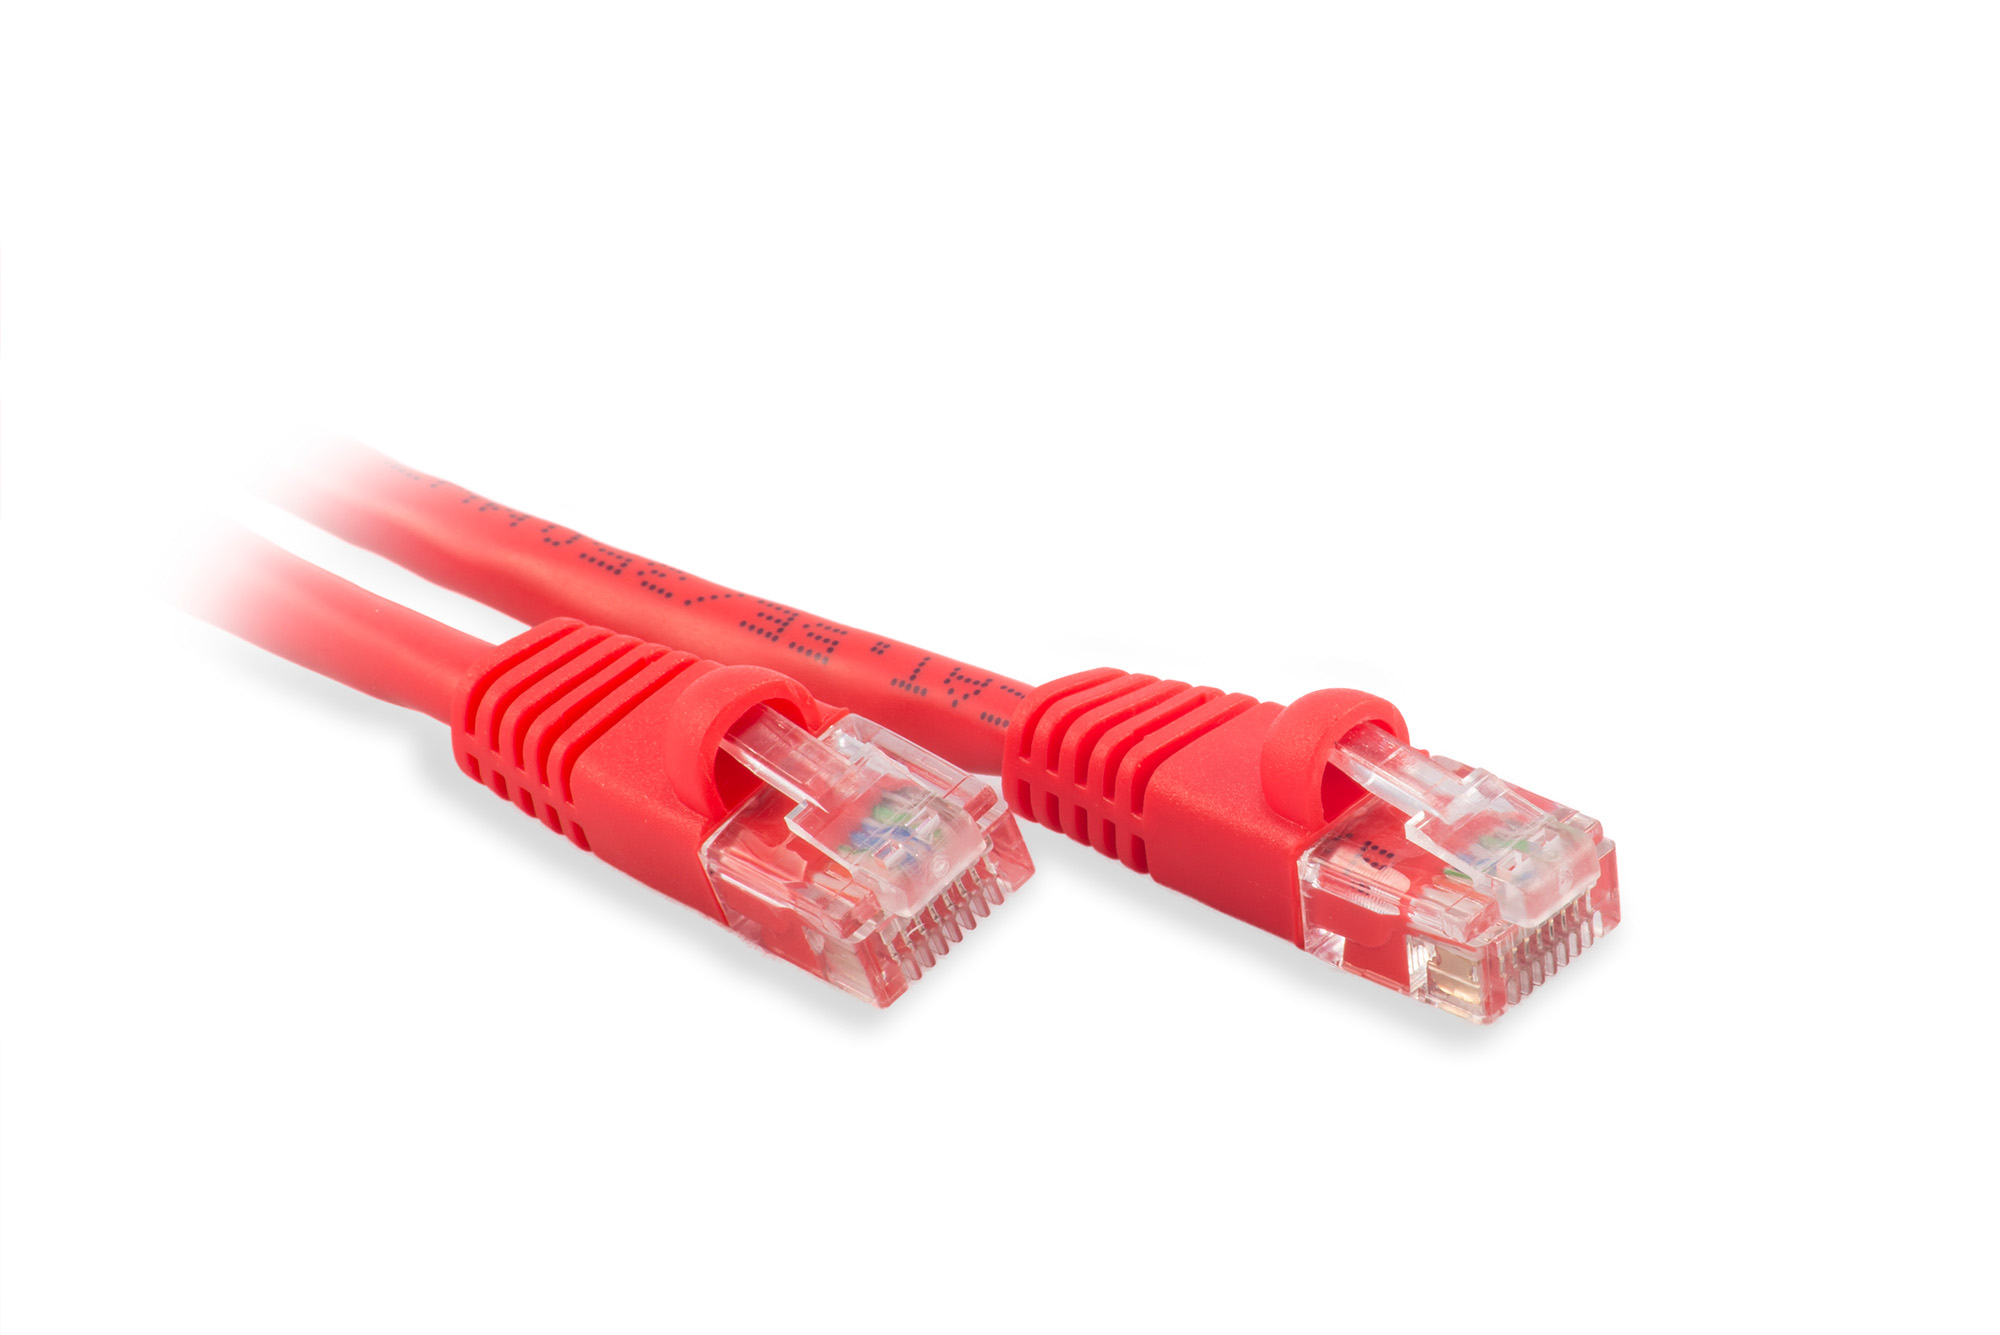 25ft Cat5e Ethernet Patch Cable - Red Color - Snagless Boot, Stranded, RJ45, 350Mhz, 24AWG